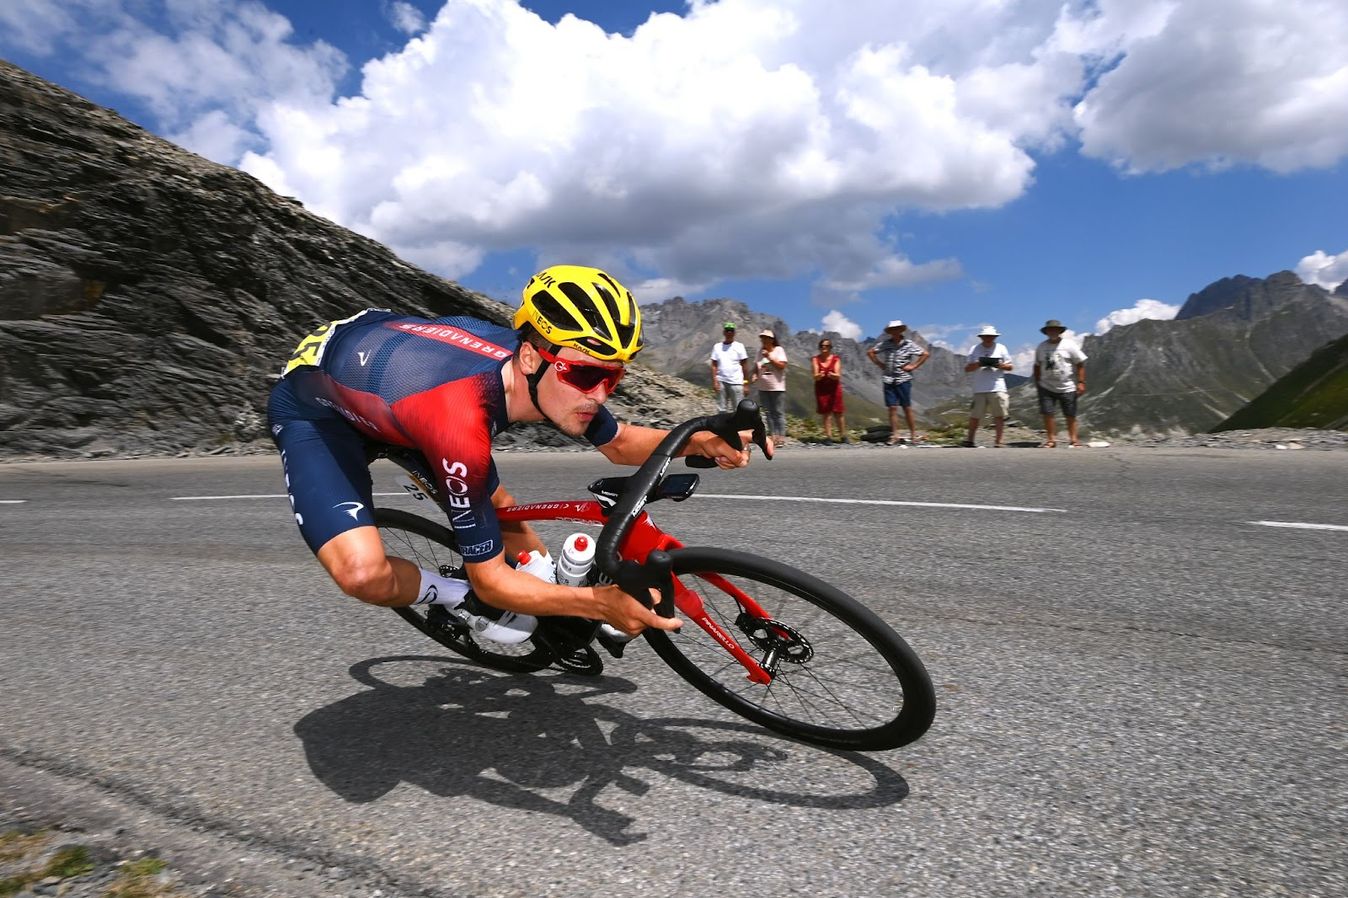 Tom Pidcock descending the Galibier last year at the Tour de France